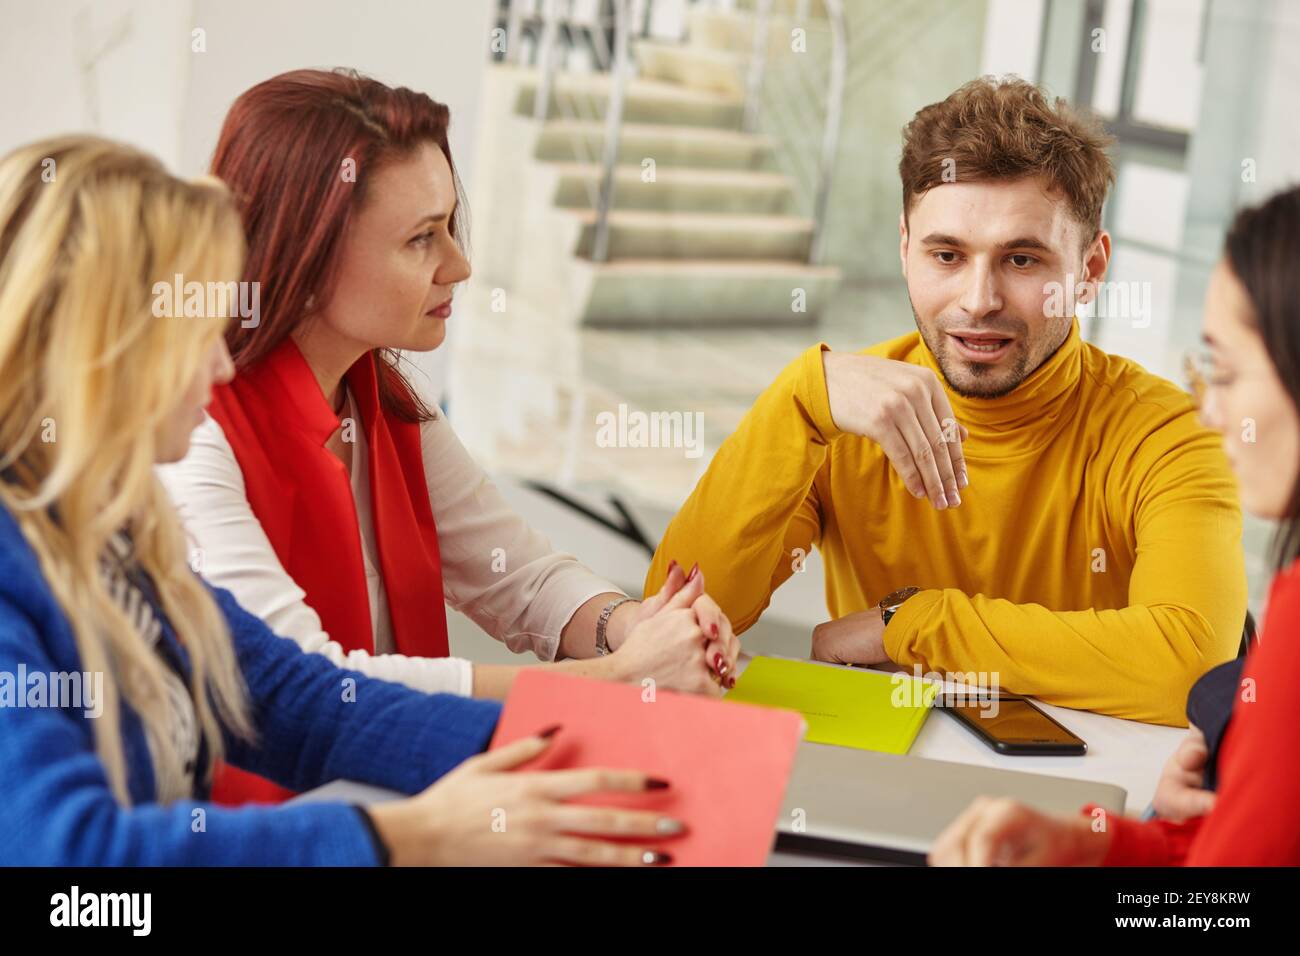 Image of business partners discussing documents and ideas at meeting Stock Photo